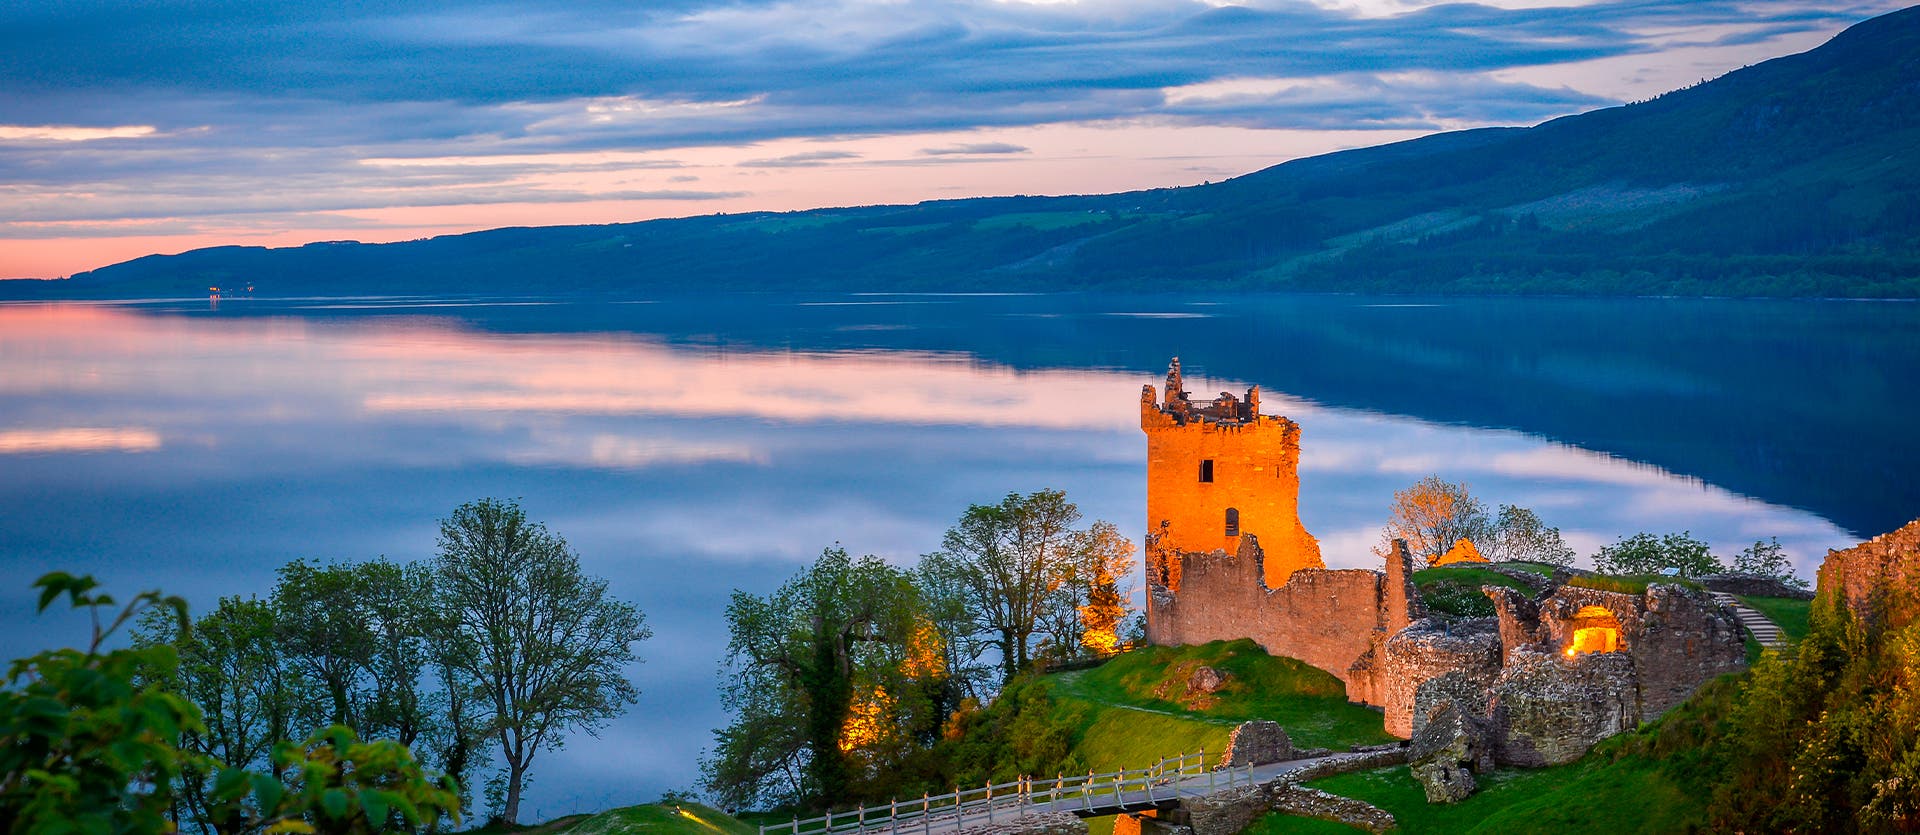 Scotland Vacation Packages & Tours All Inclusive Exoticca